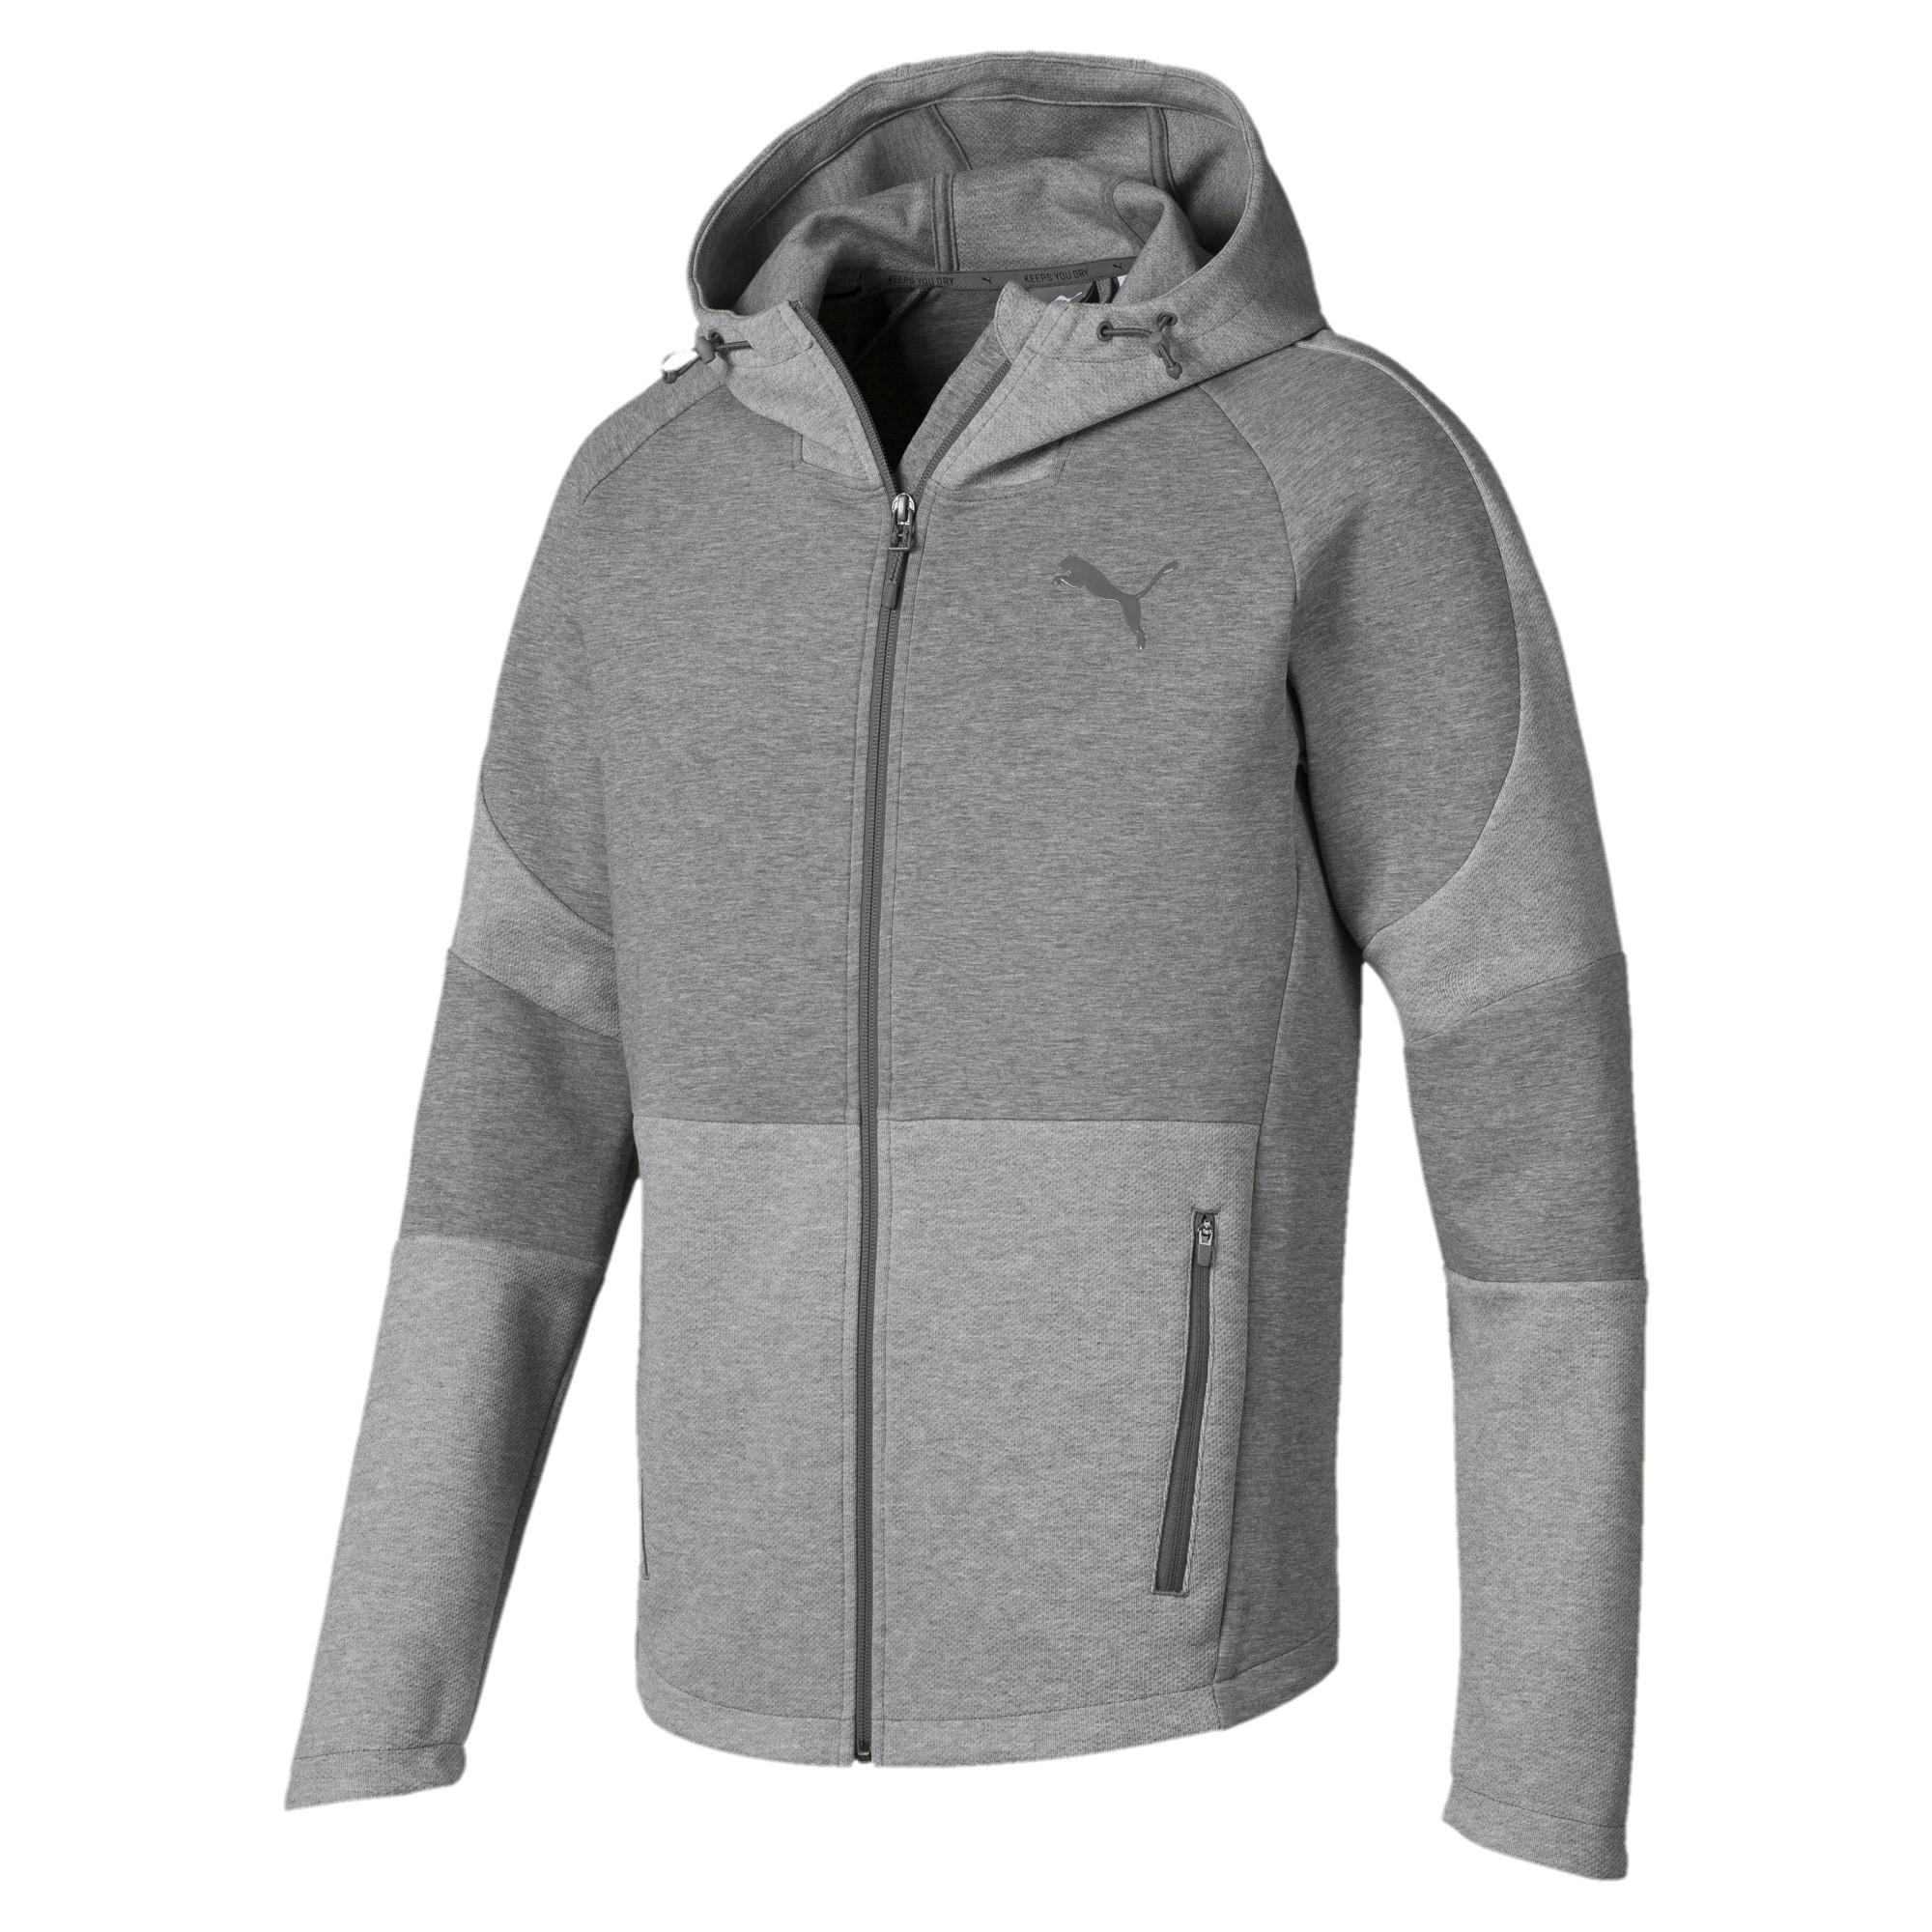 PUMA Synthetic Evostripe Move Hooded Jacket in 03 (Gray) for Men - Lyst